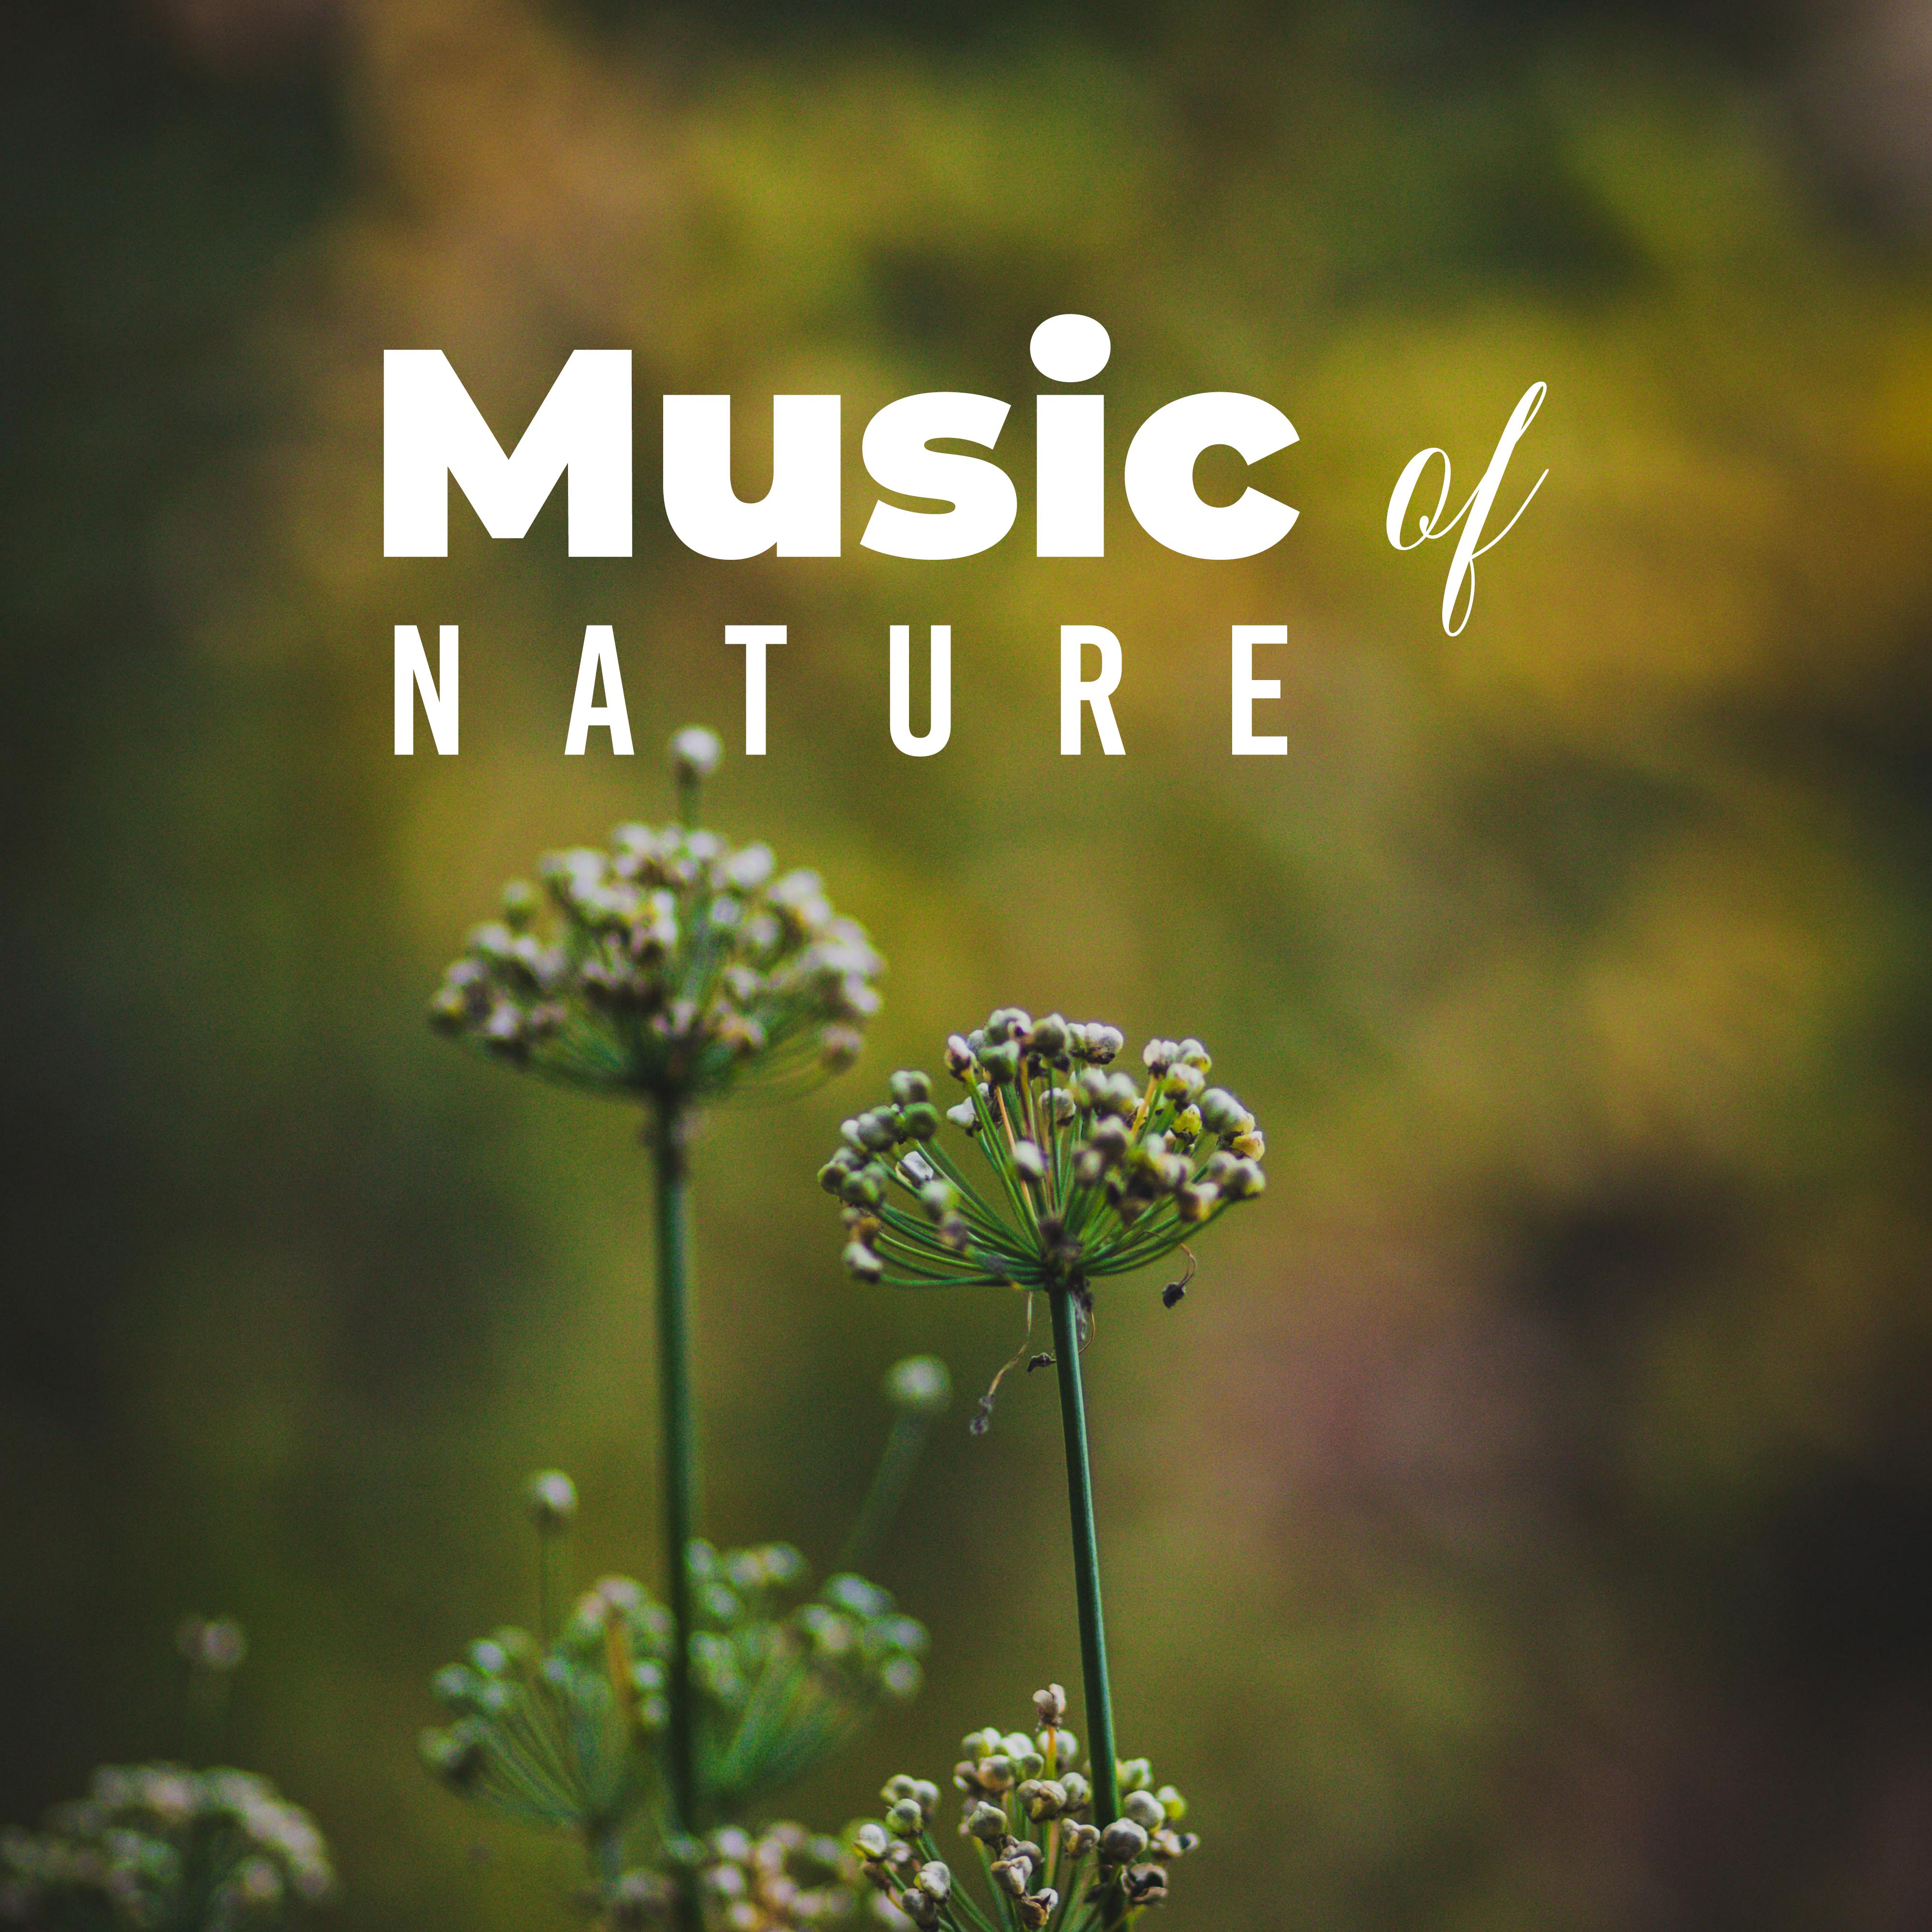 Music of Nature - Birds Singing, Sounds of Water, Heat of Rain, Smell of the Forest, Music of the Night and Piano in the Background